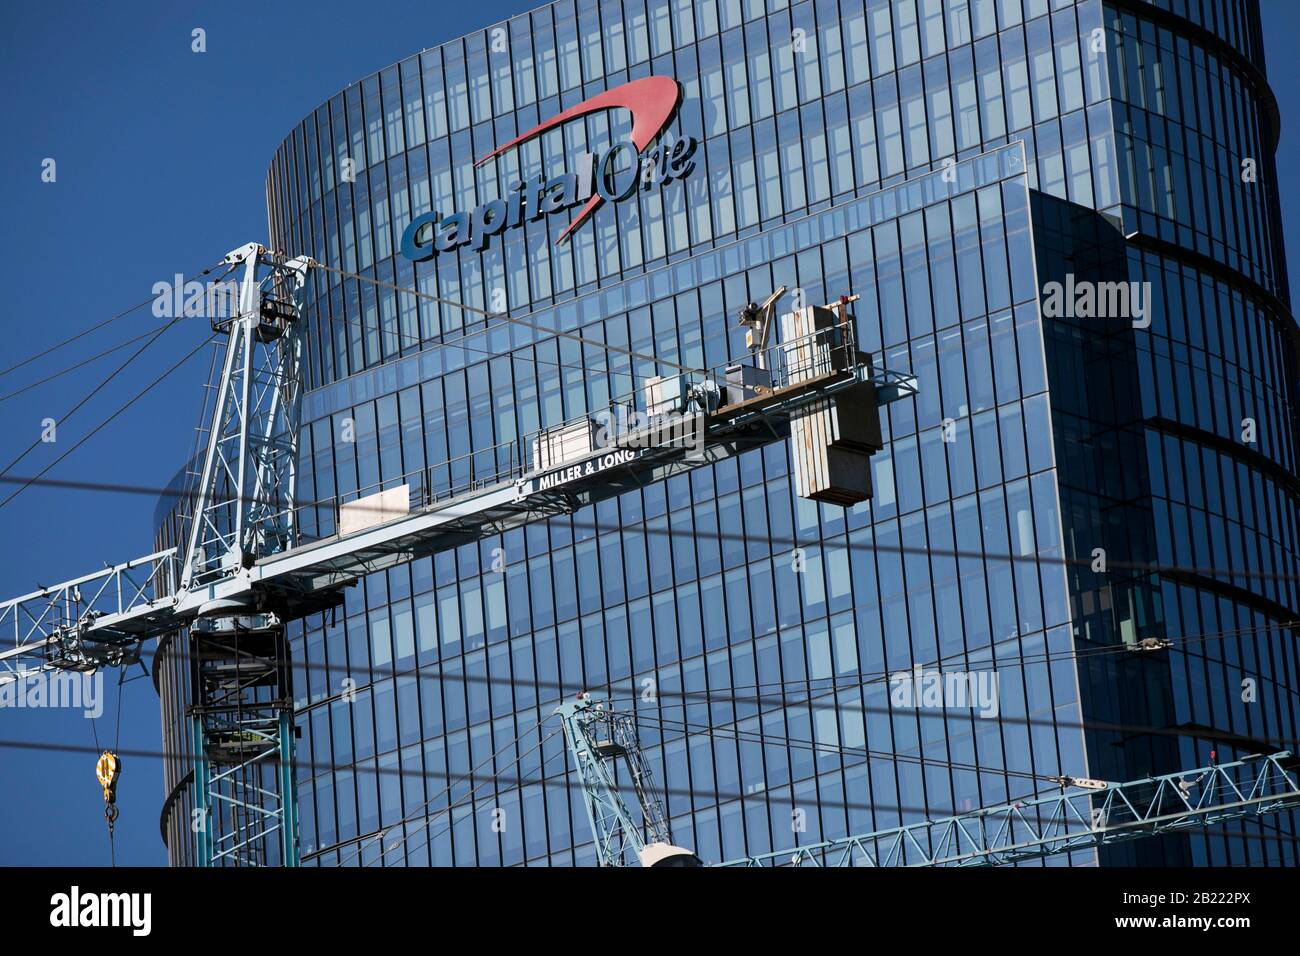 A logo sign outside of the headquarters of Capital One Financial Corporation (Bank) in McLean, Virginia, on February 23, 2020. Stock Photo